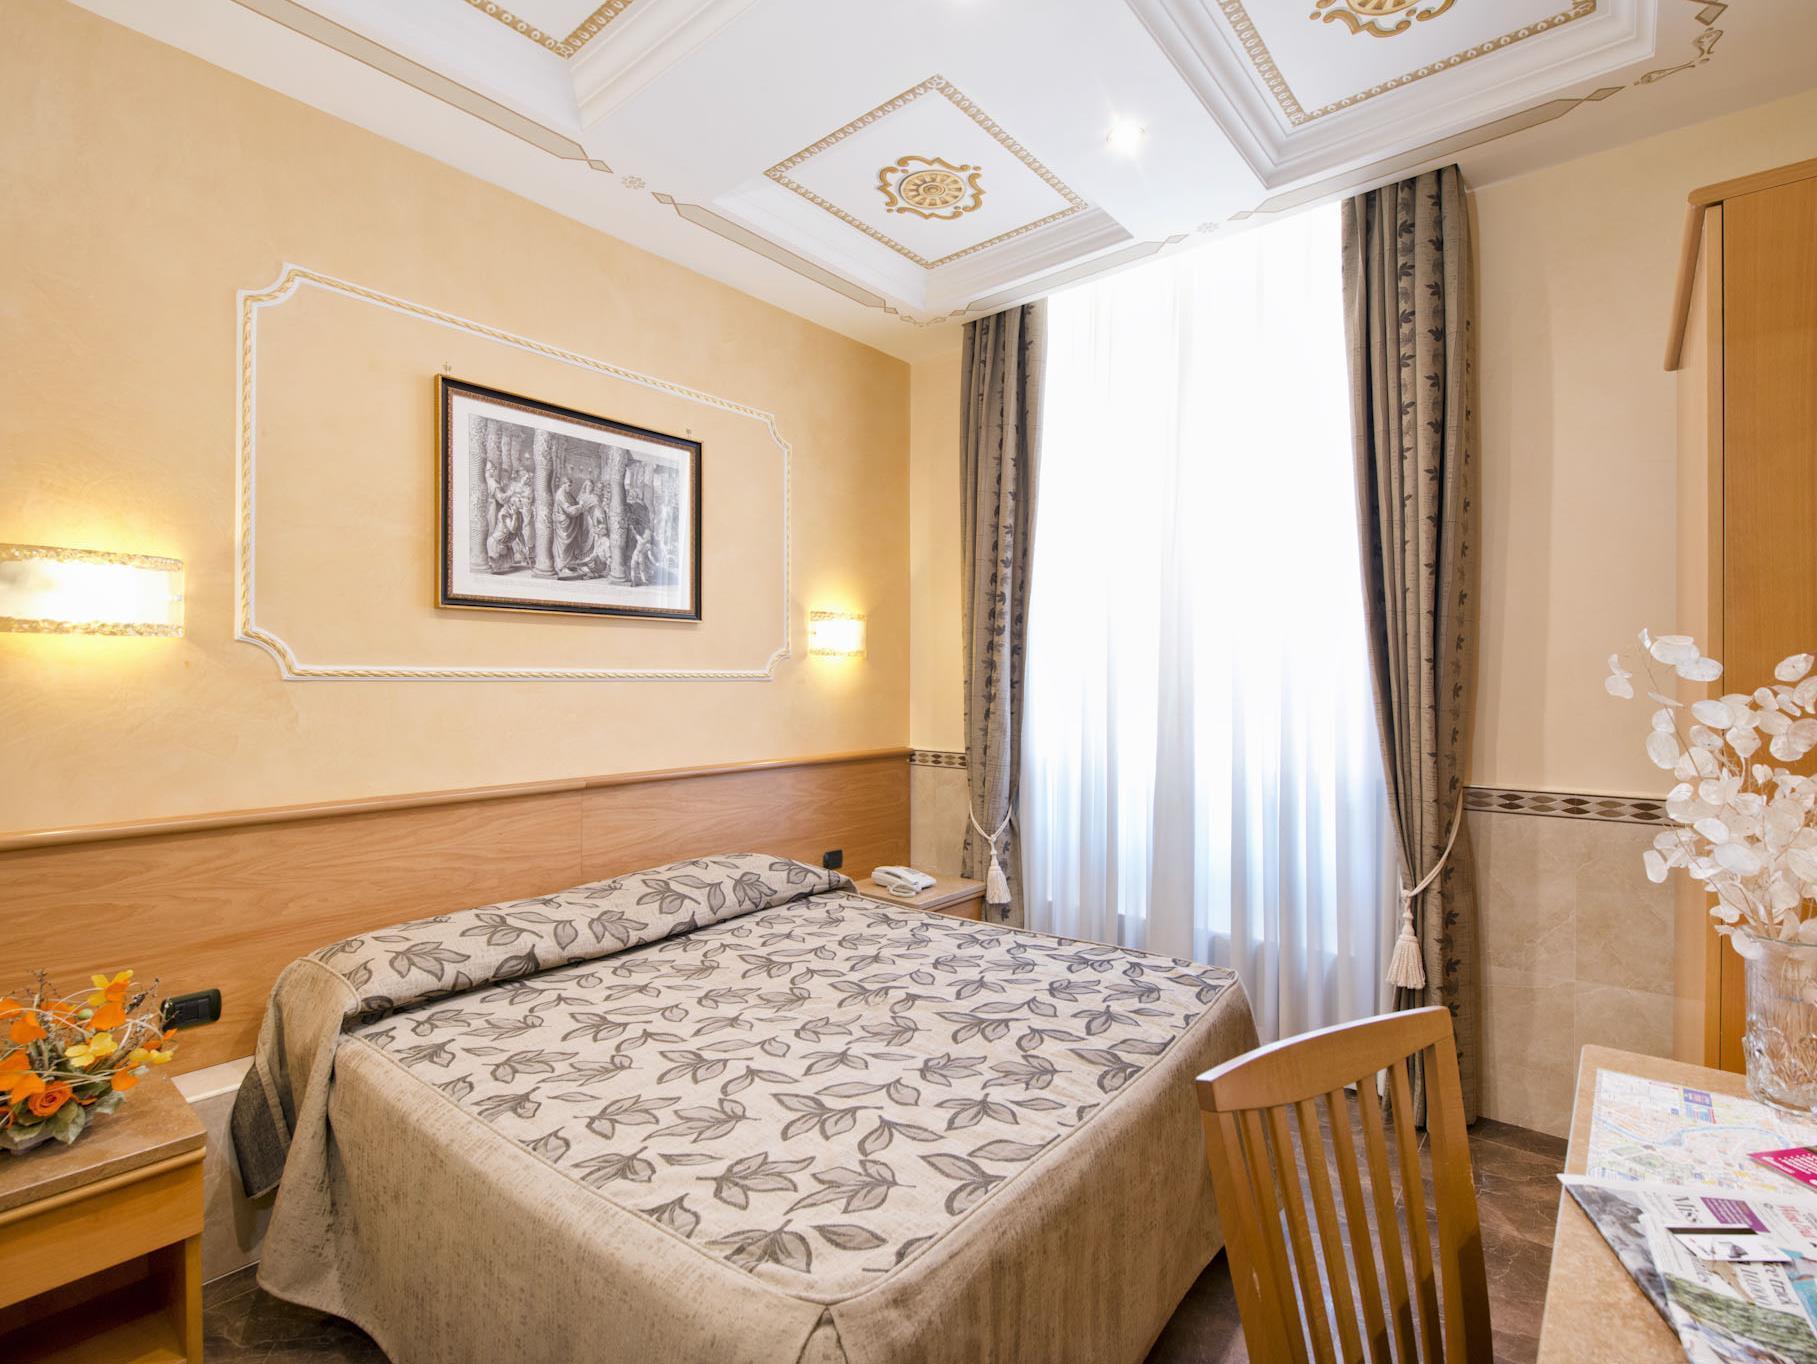 Marco Polo Hotel Rome-Rome Updated 2023 Room Price-Reviews & Deals |  Trip.com